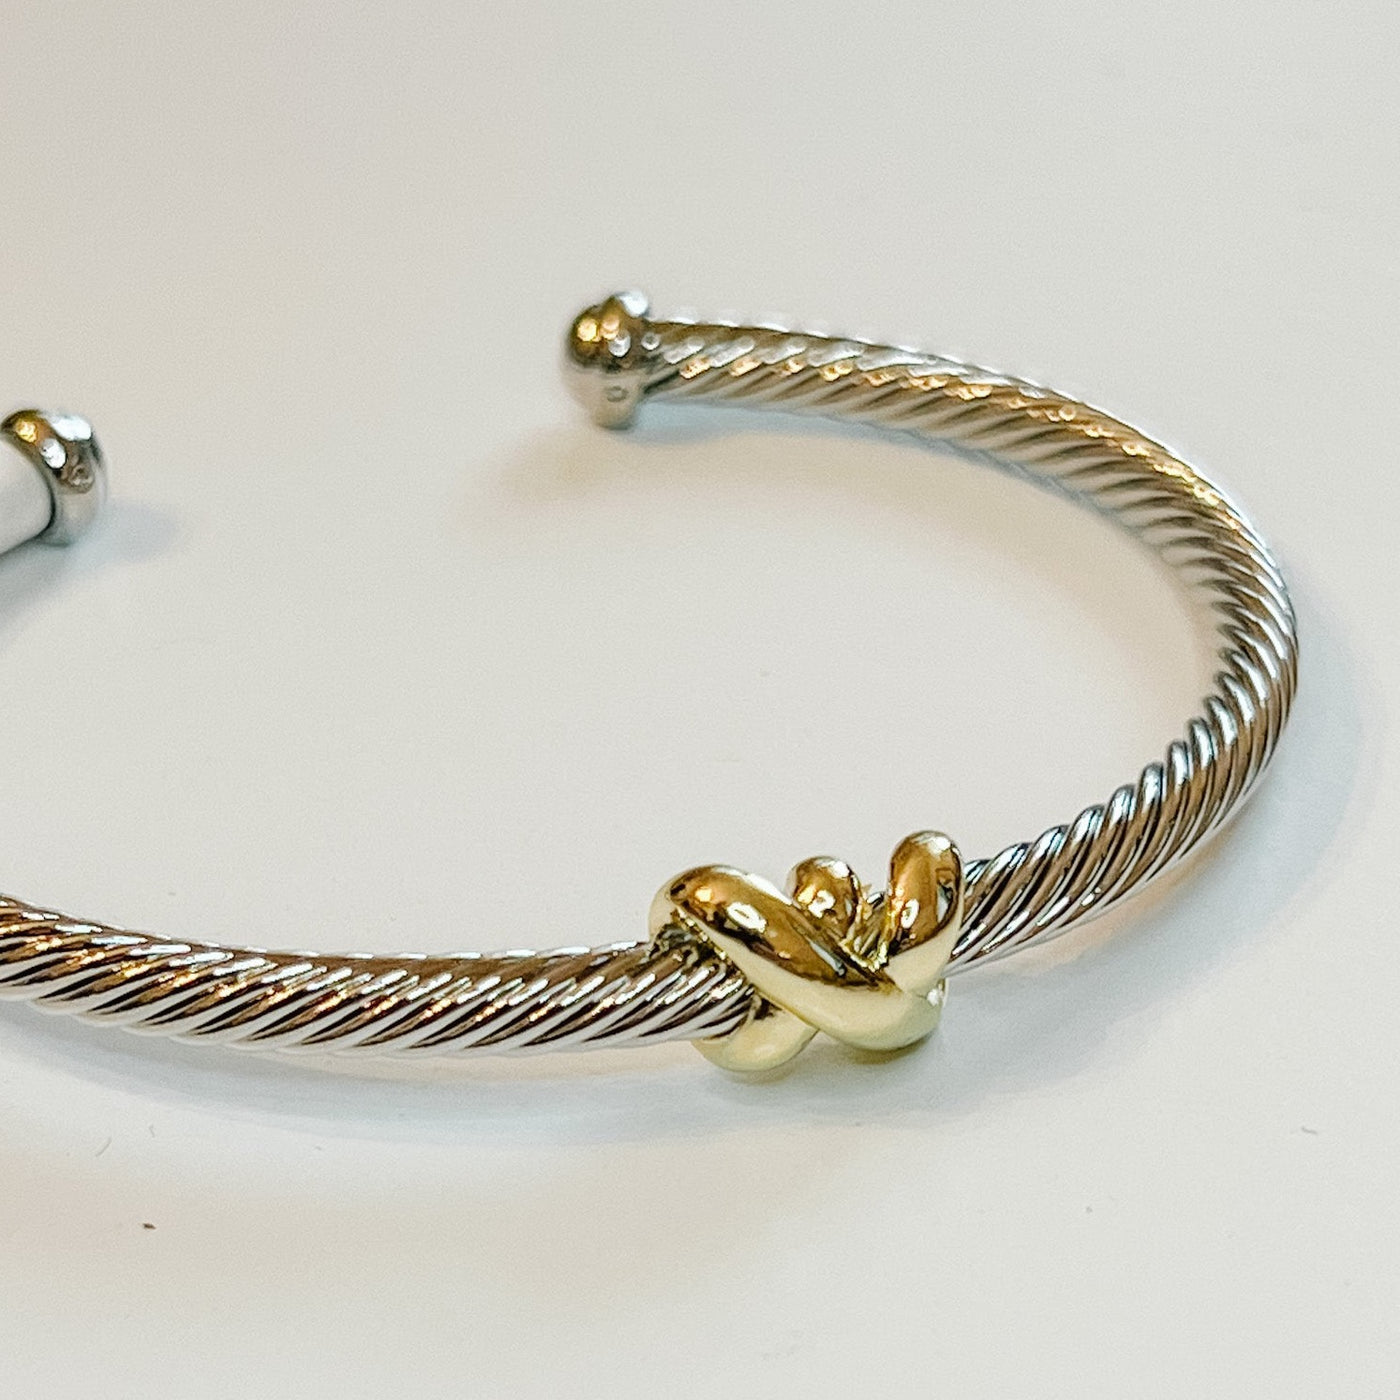 Ashton Bracelet offers smart style with an elegant twist. Crafted with a twisted cable cuff and two tone design, its signature roped gold X adds a distinctive finishing touch.